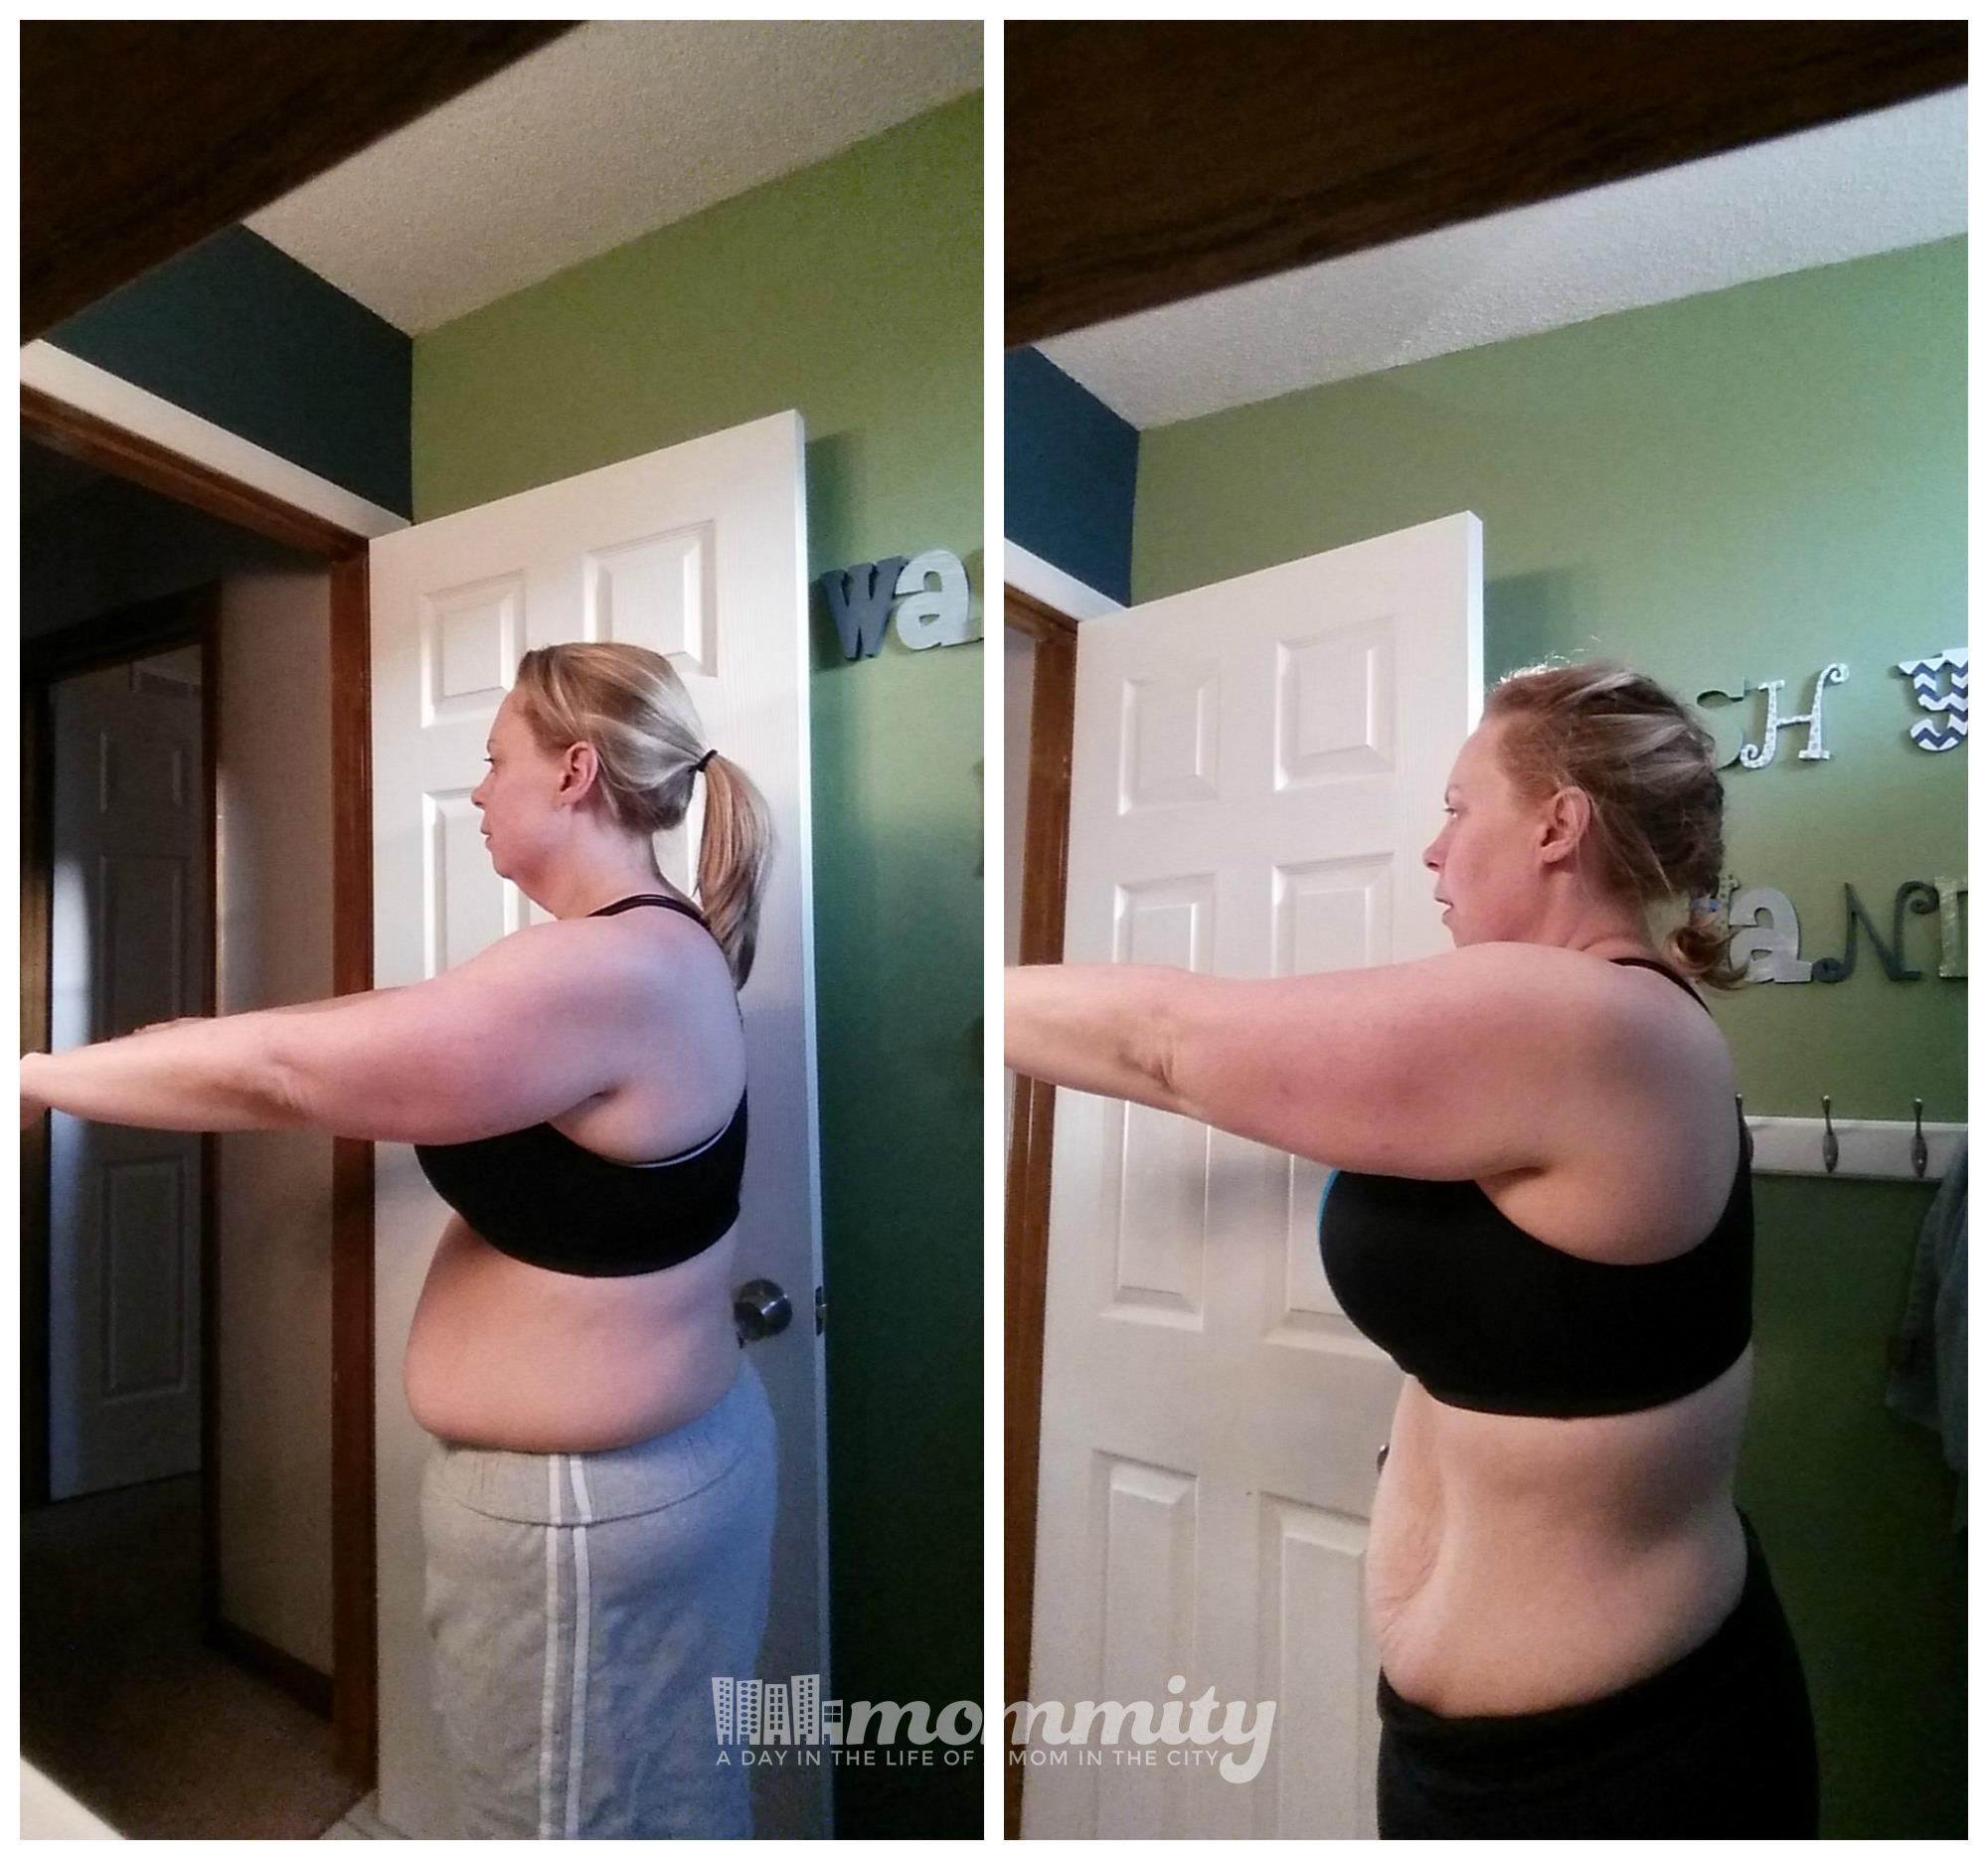 The Beach Body 21 Day Fix Wasn't What I Expected... A journey to lose 78 pounds and how Beach Body helped with the 21 Day Fix